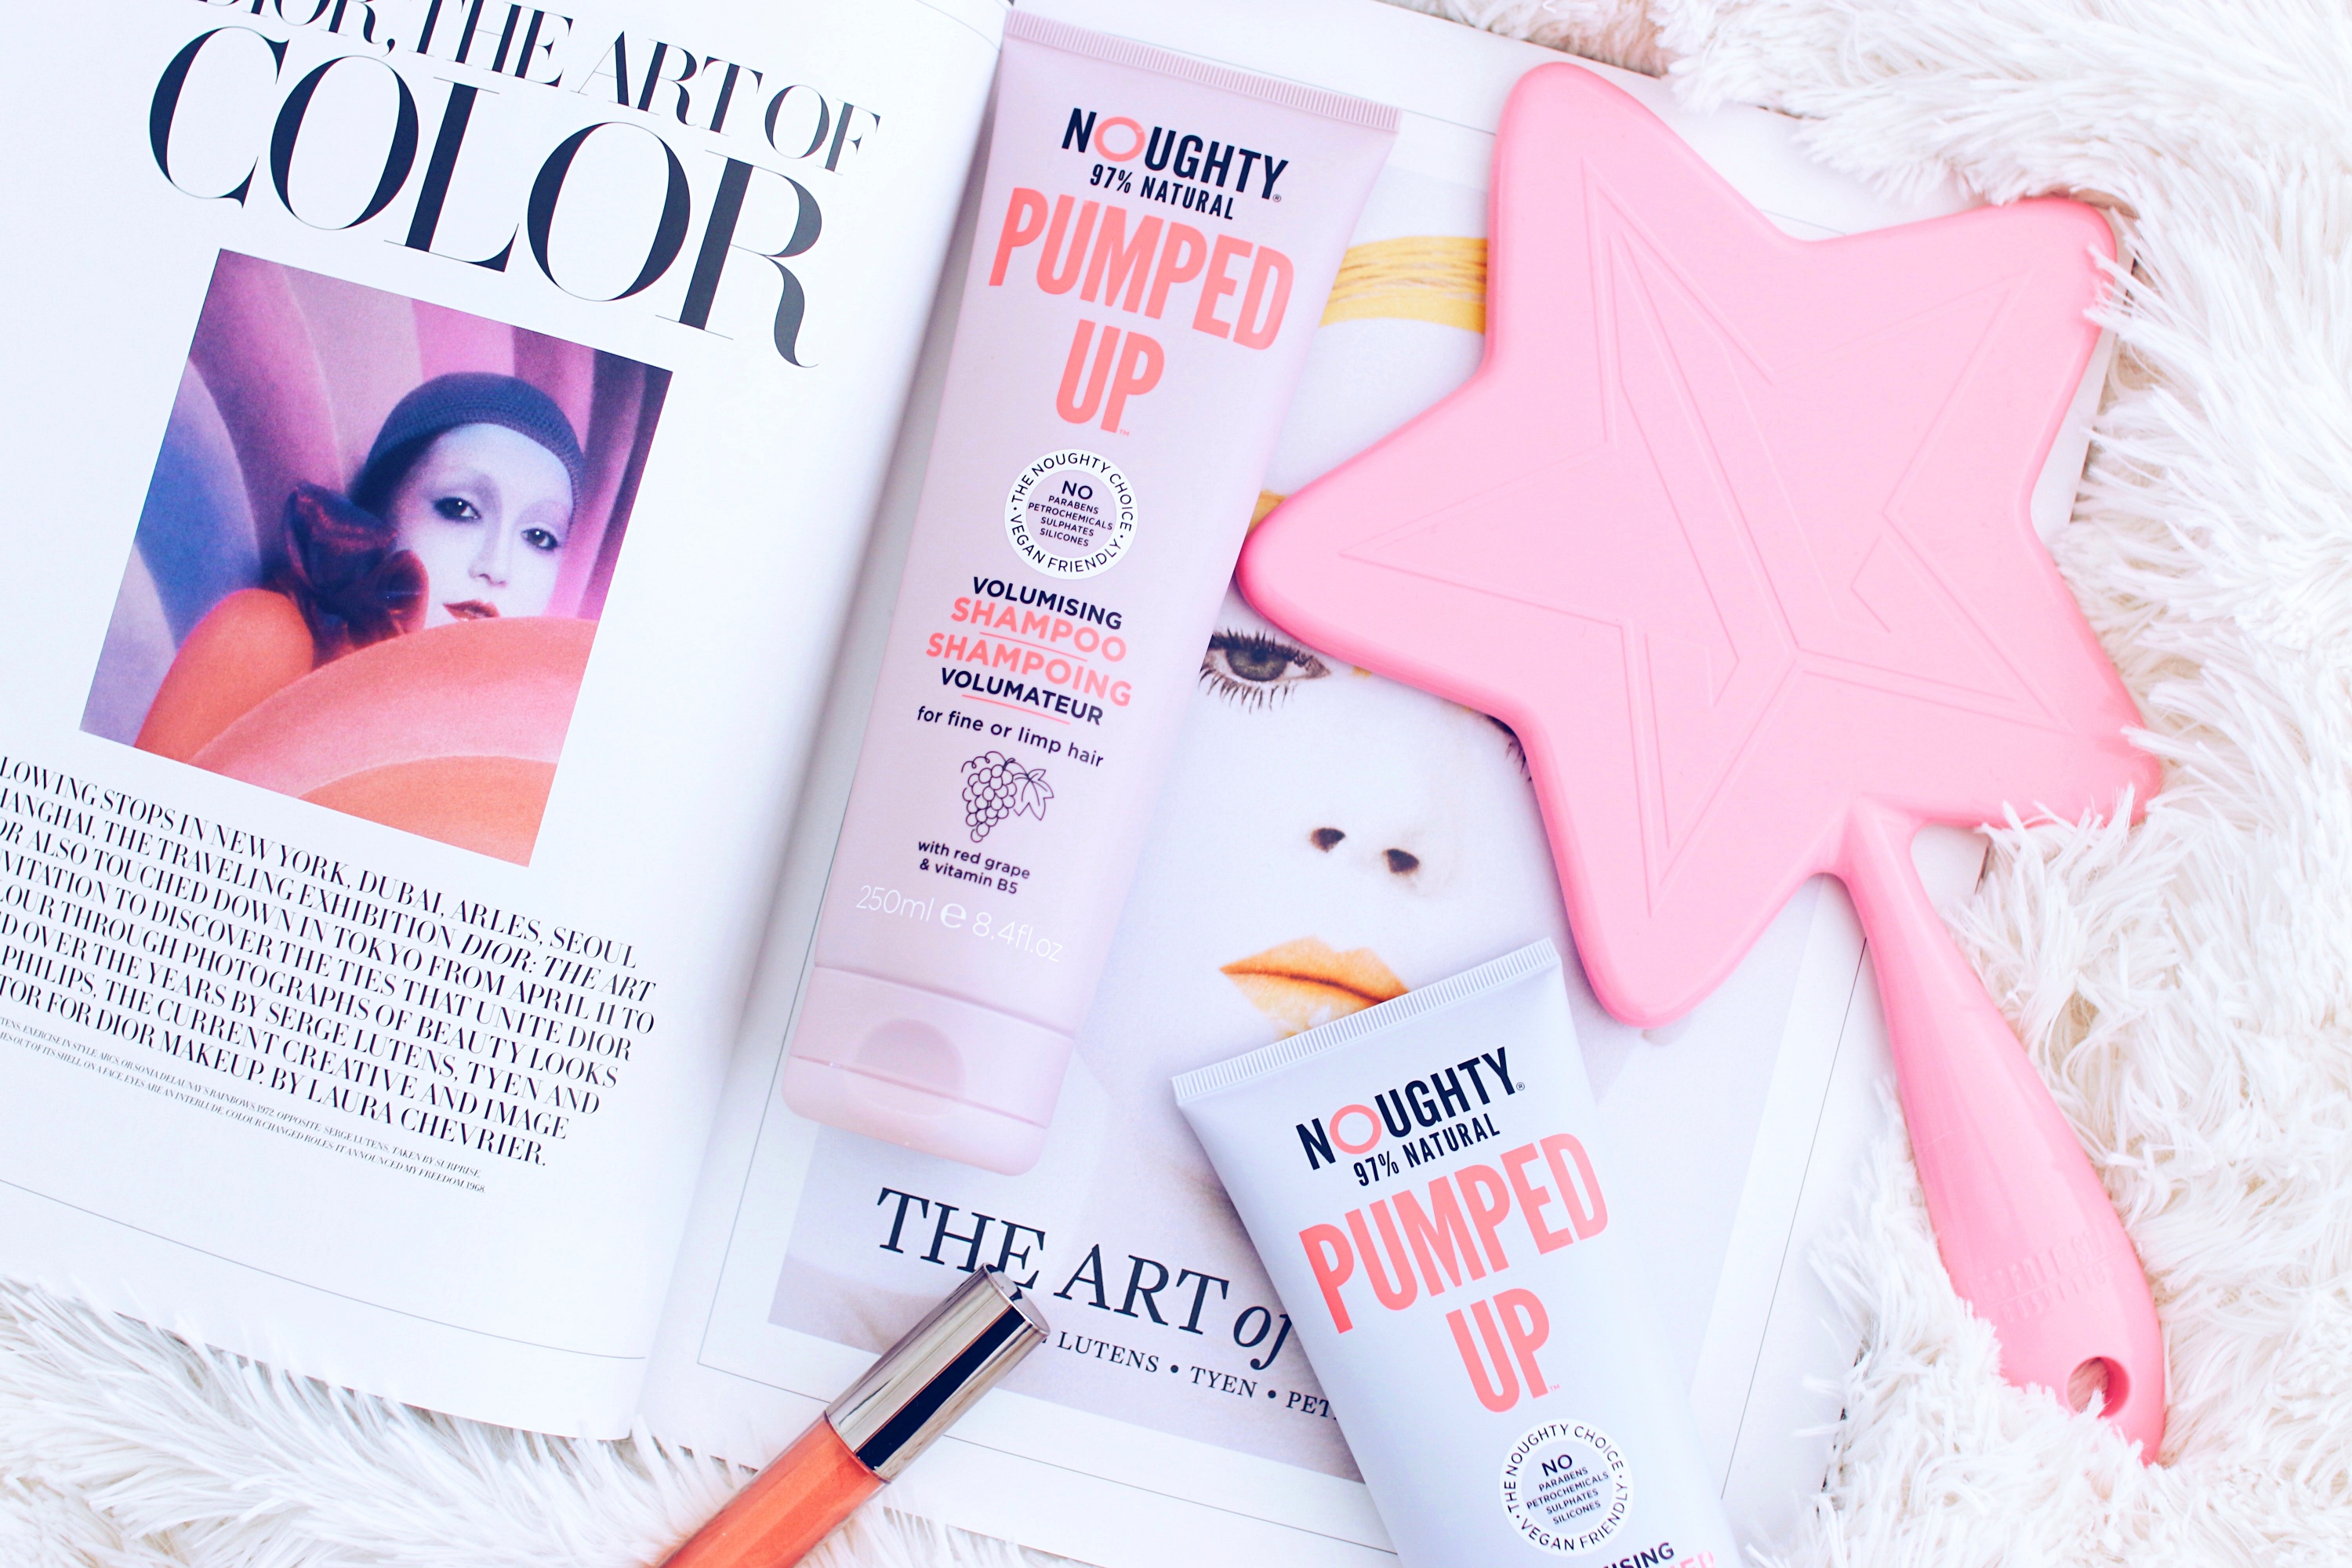 Noughty Pumped Up Shampoo Review - The LDN Diaries